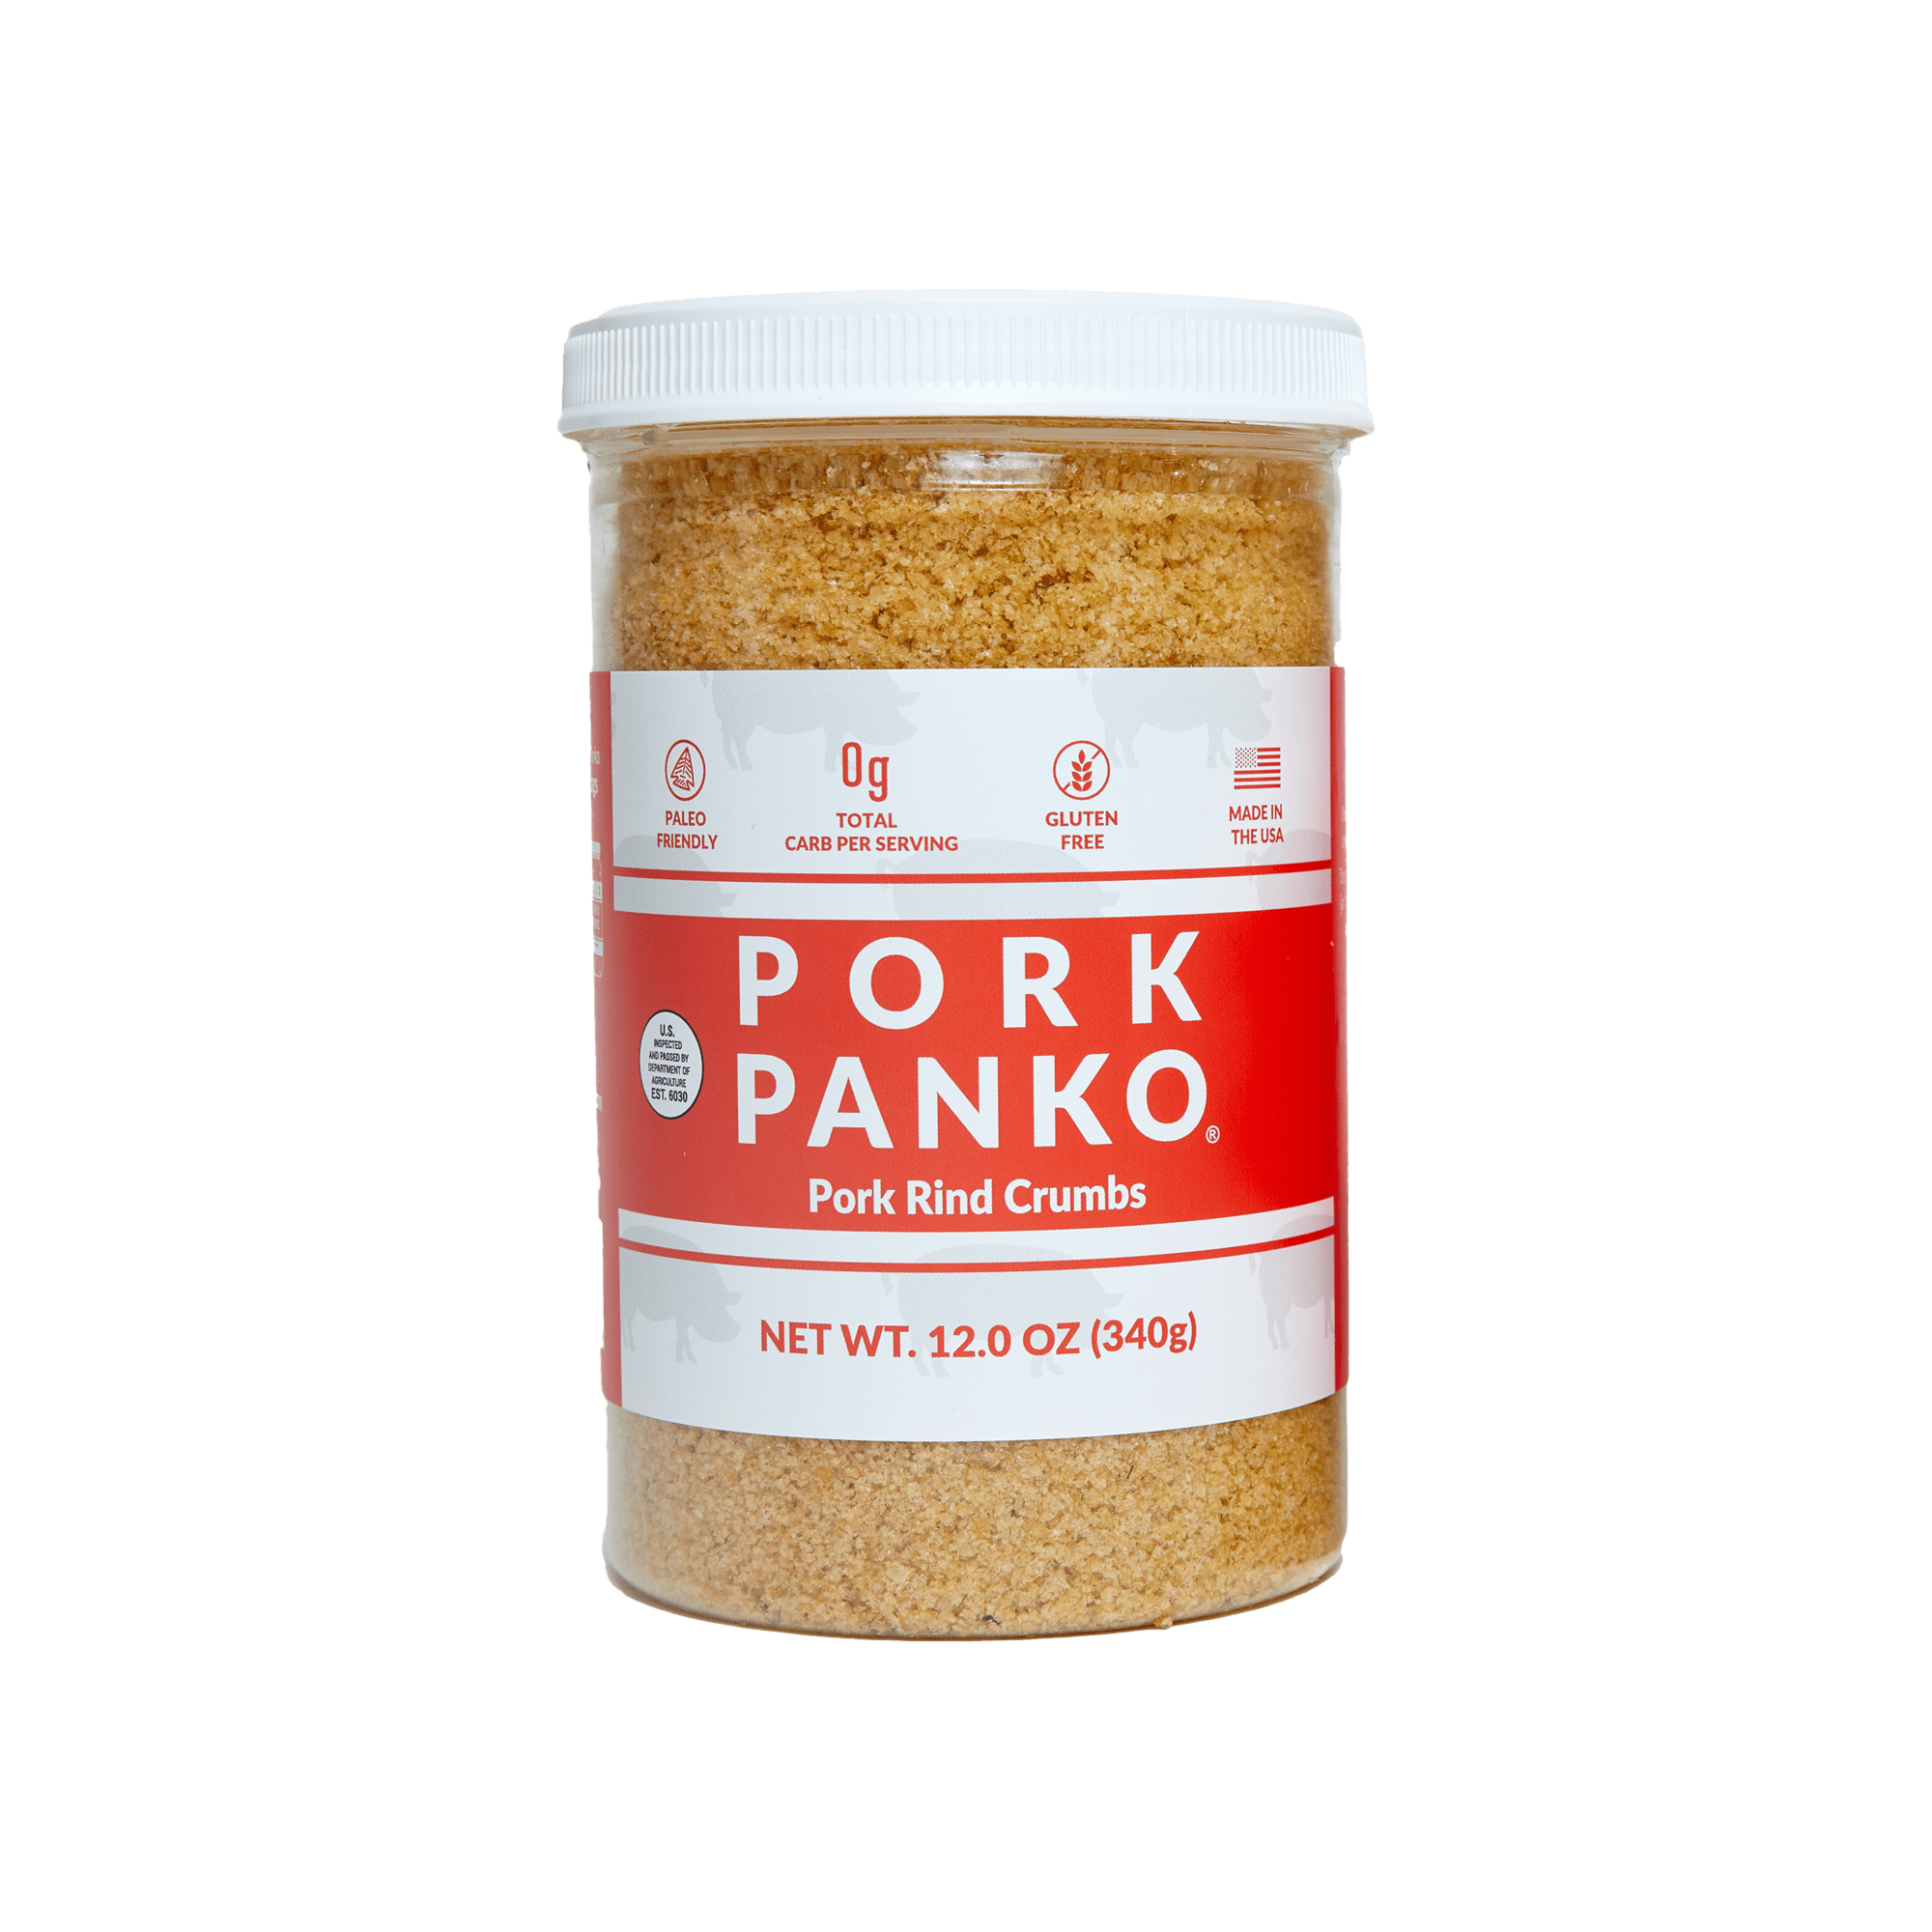  Pork King Good Unseasoned Pork Rind Breadcrumbs (Low Carb Keto  Diet)! Perfect For Ketogenic, Paleo, Gluten-Free, Sugar Free and Bariatric  Diets. Carb free! : Grocery & Gourmet Food